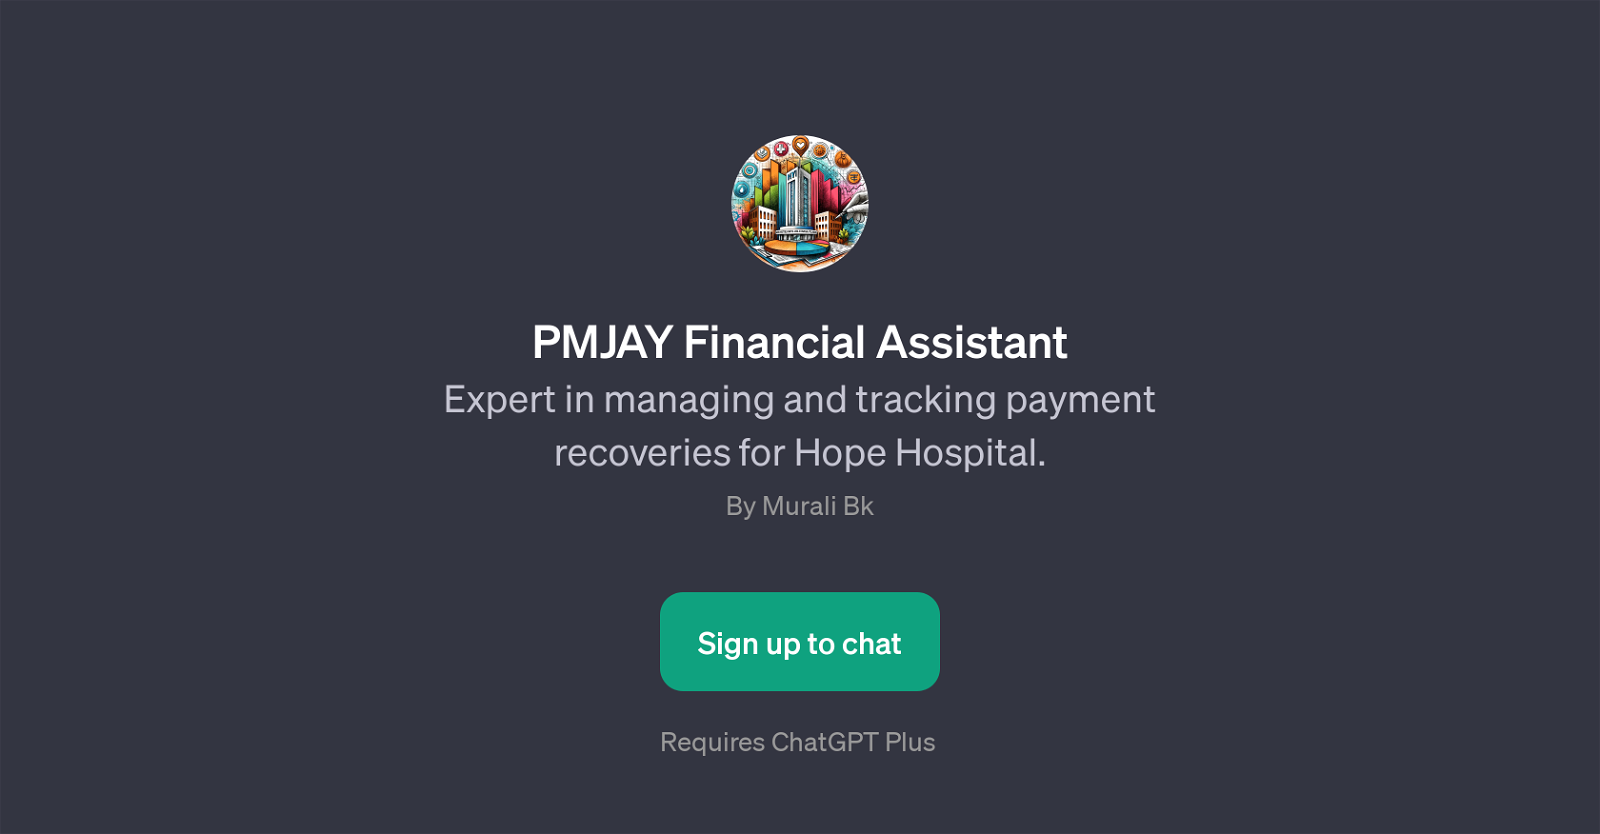 PMJAY Financial Assistant website